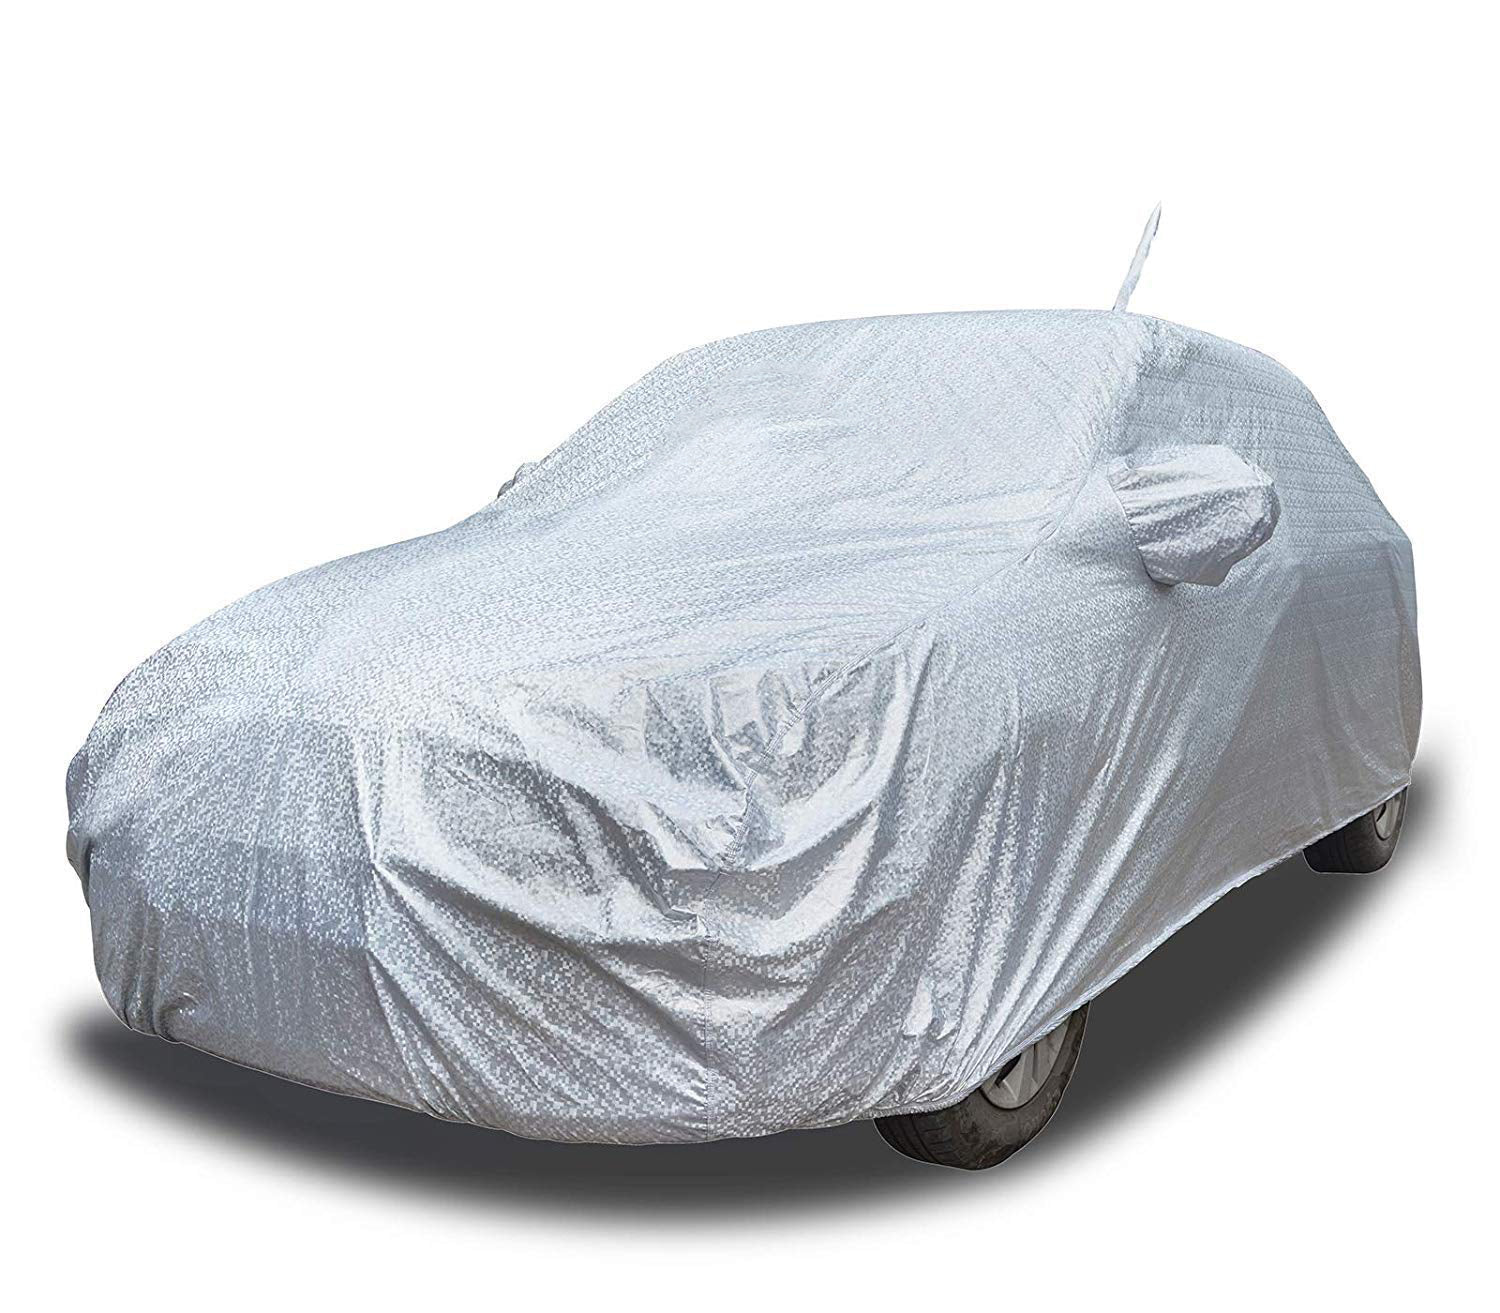 Swarish Car Cover For Audi A8 (With Mirror Pockets) Price in India - Buy  Swarish Car Cover For Audi A8 (With Mirror Pockets) online at